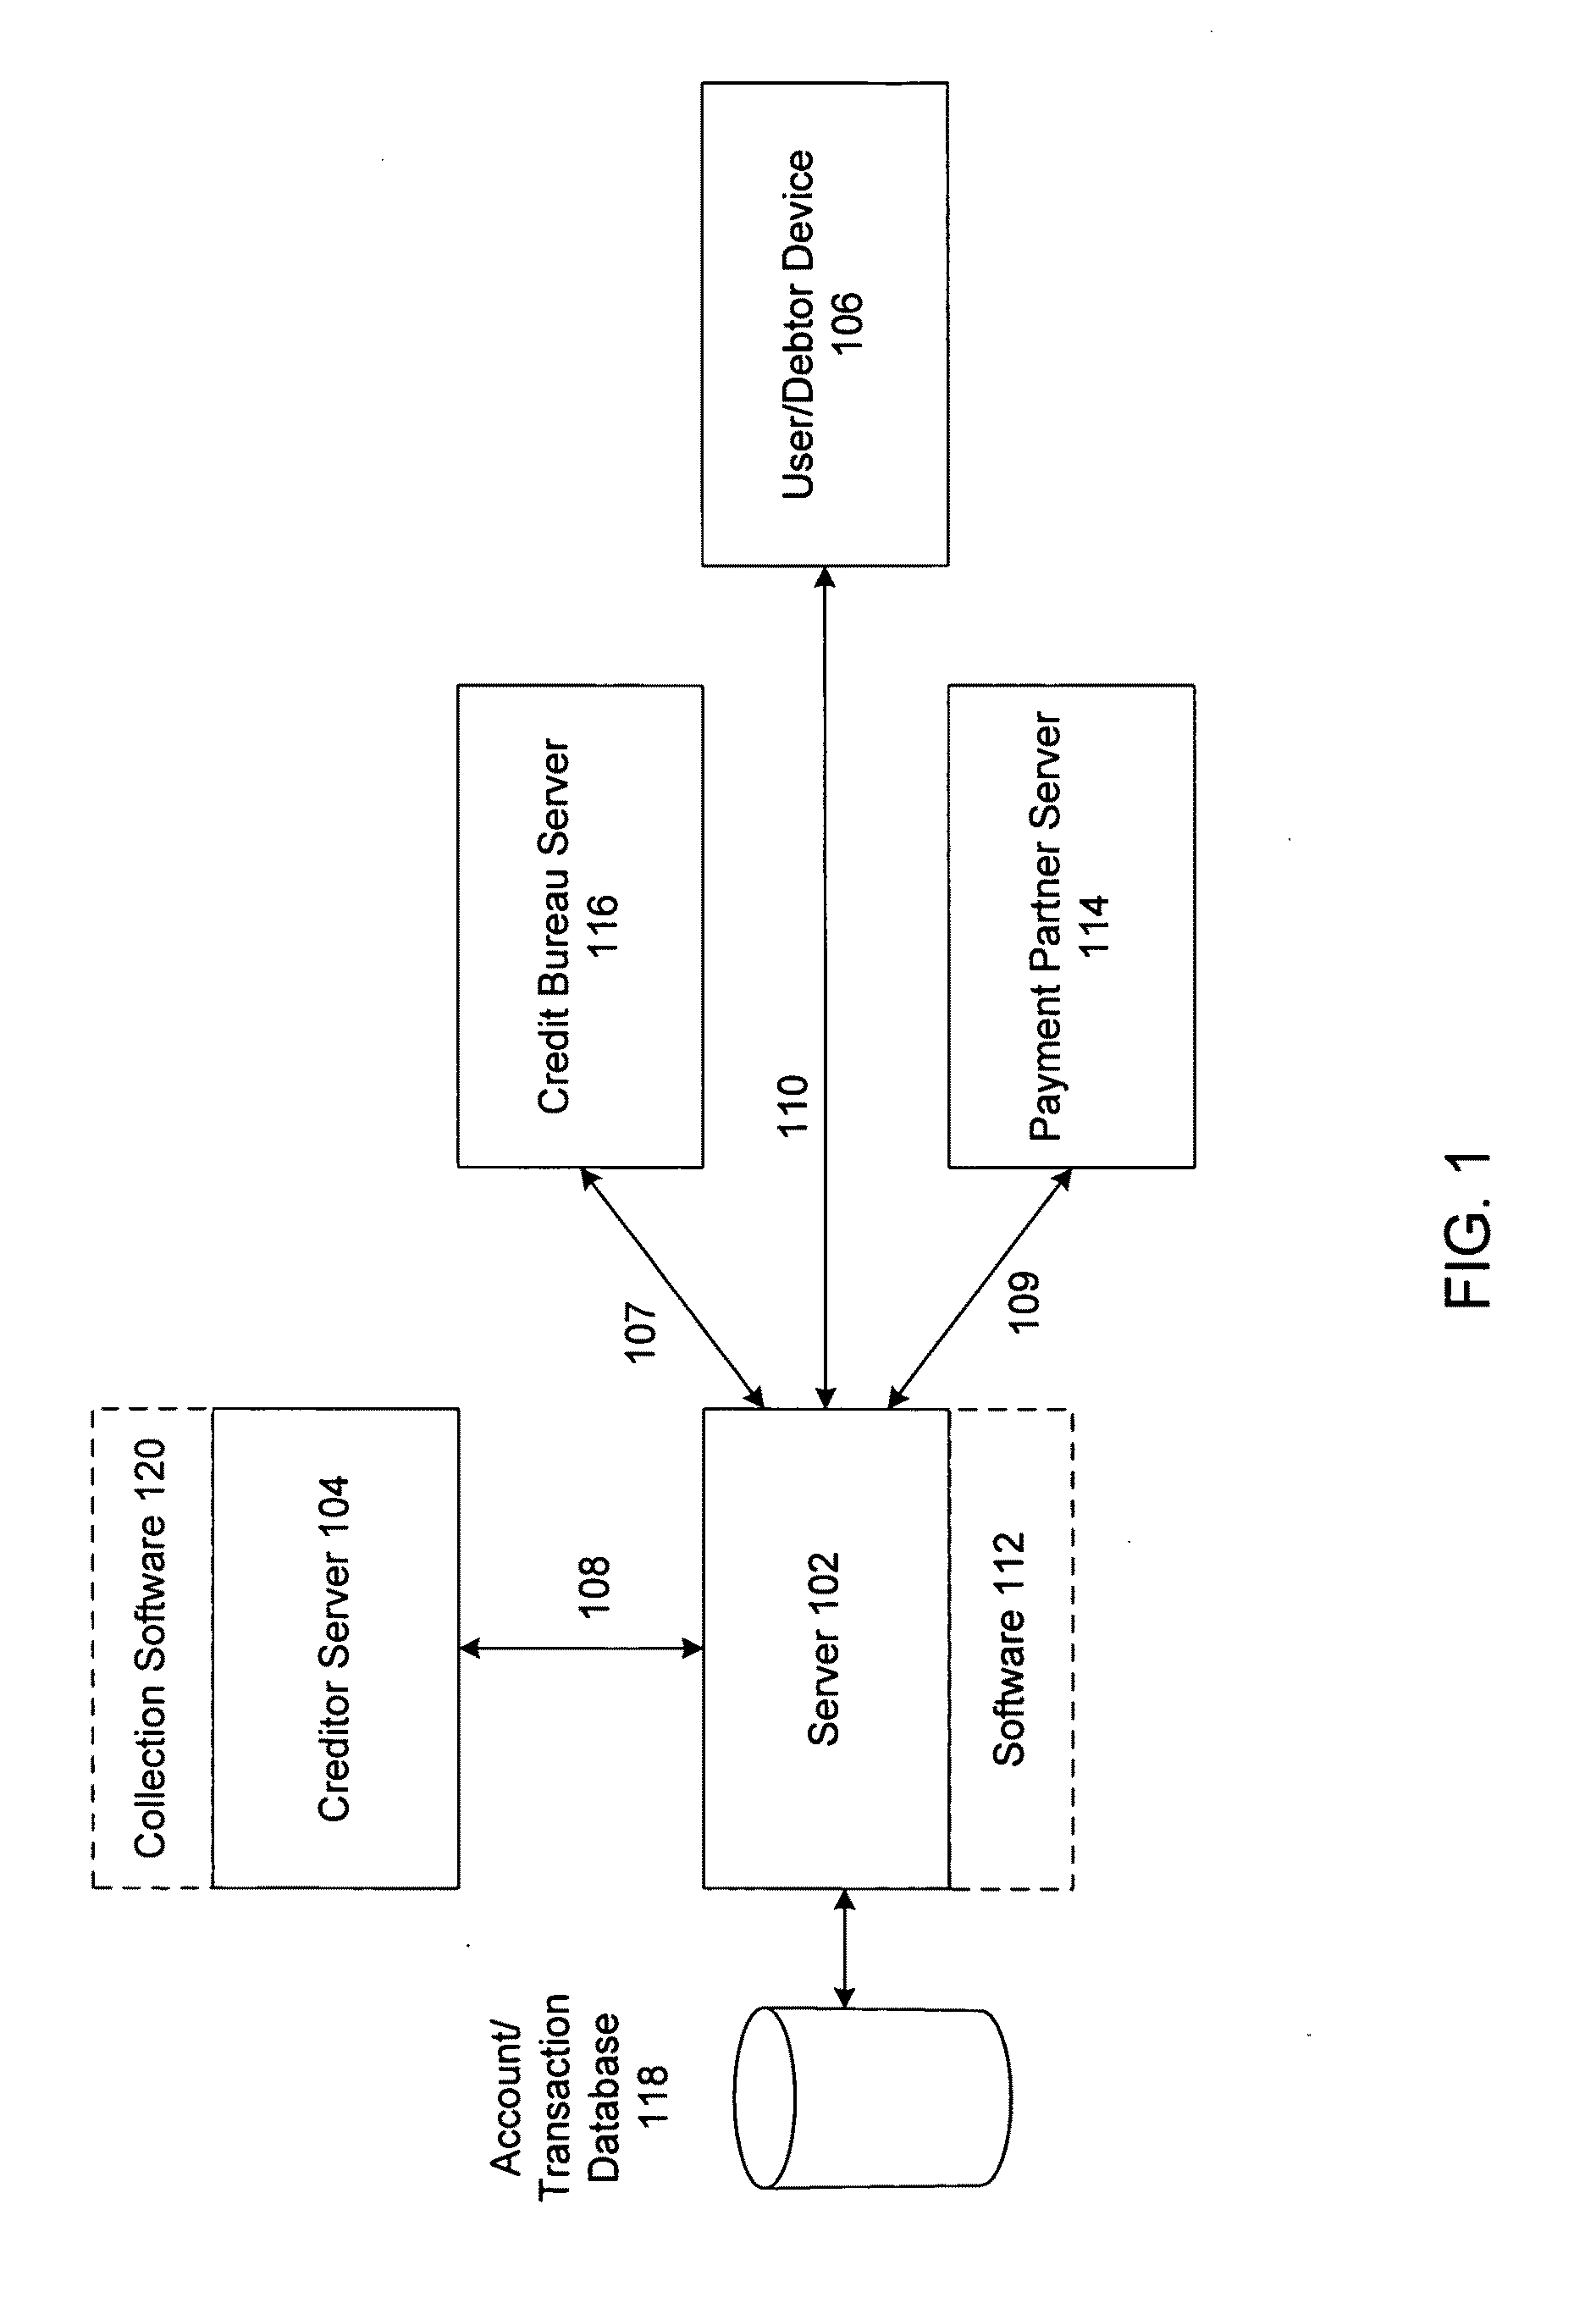 System and method for resolving transactions employing goal seeking attributes